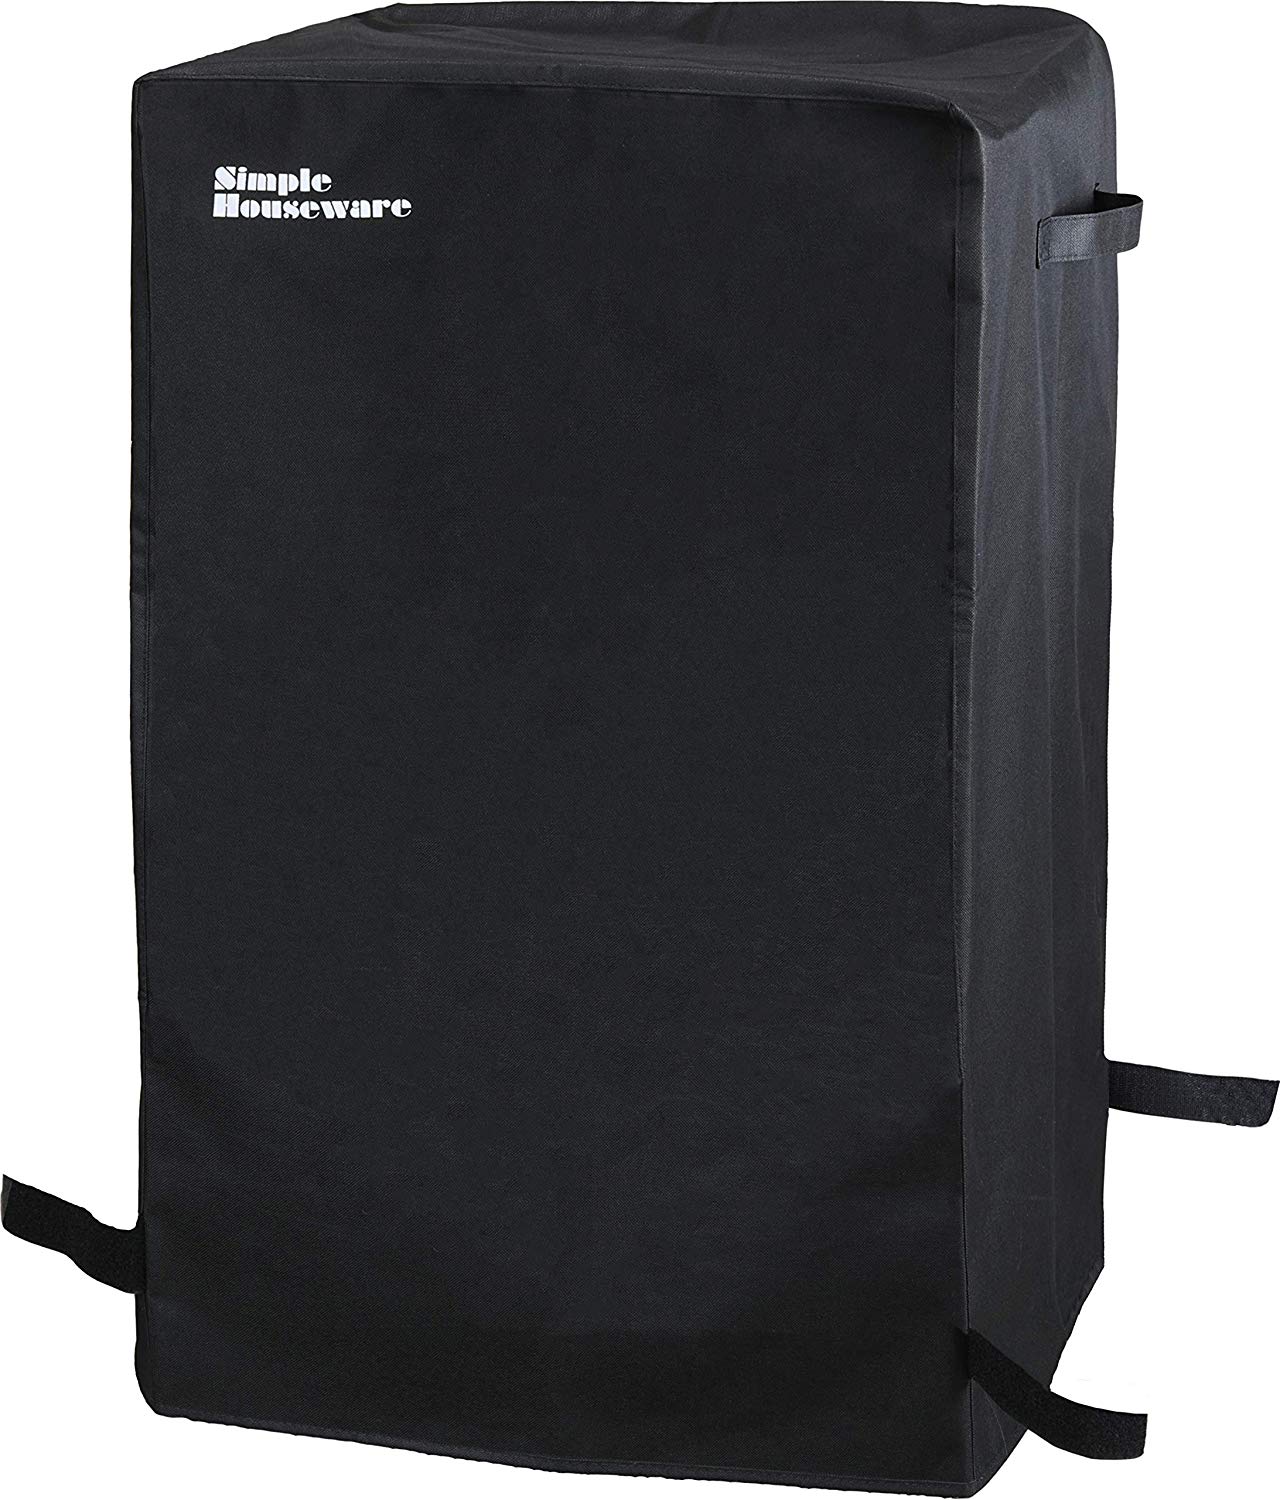 Simple Houseware Electric Smoker Grill Cover